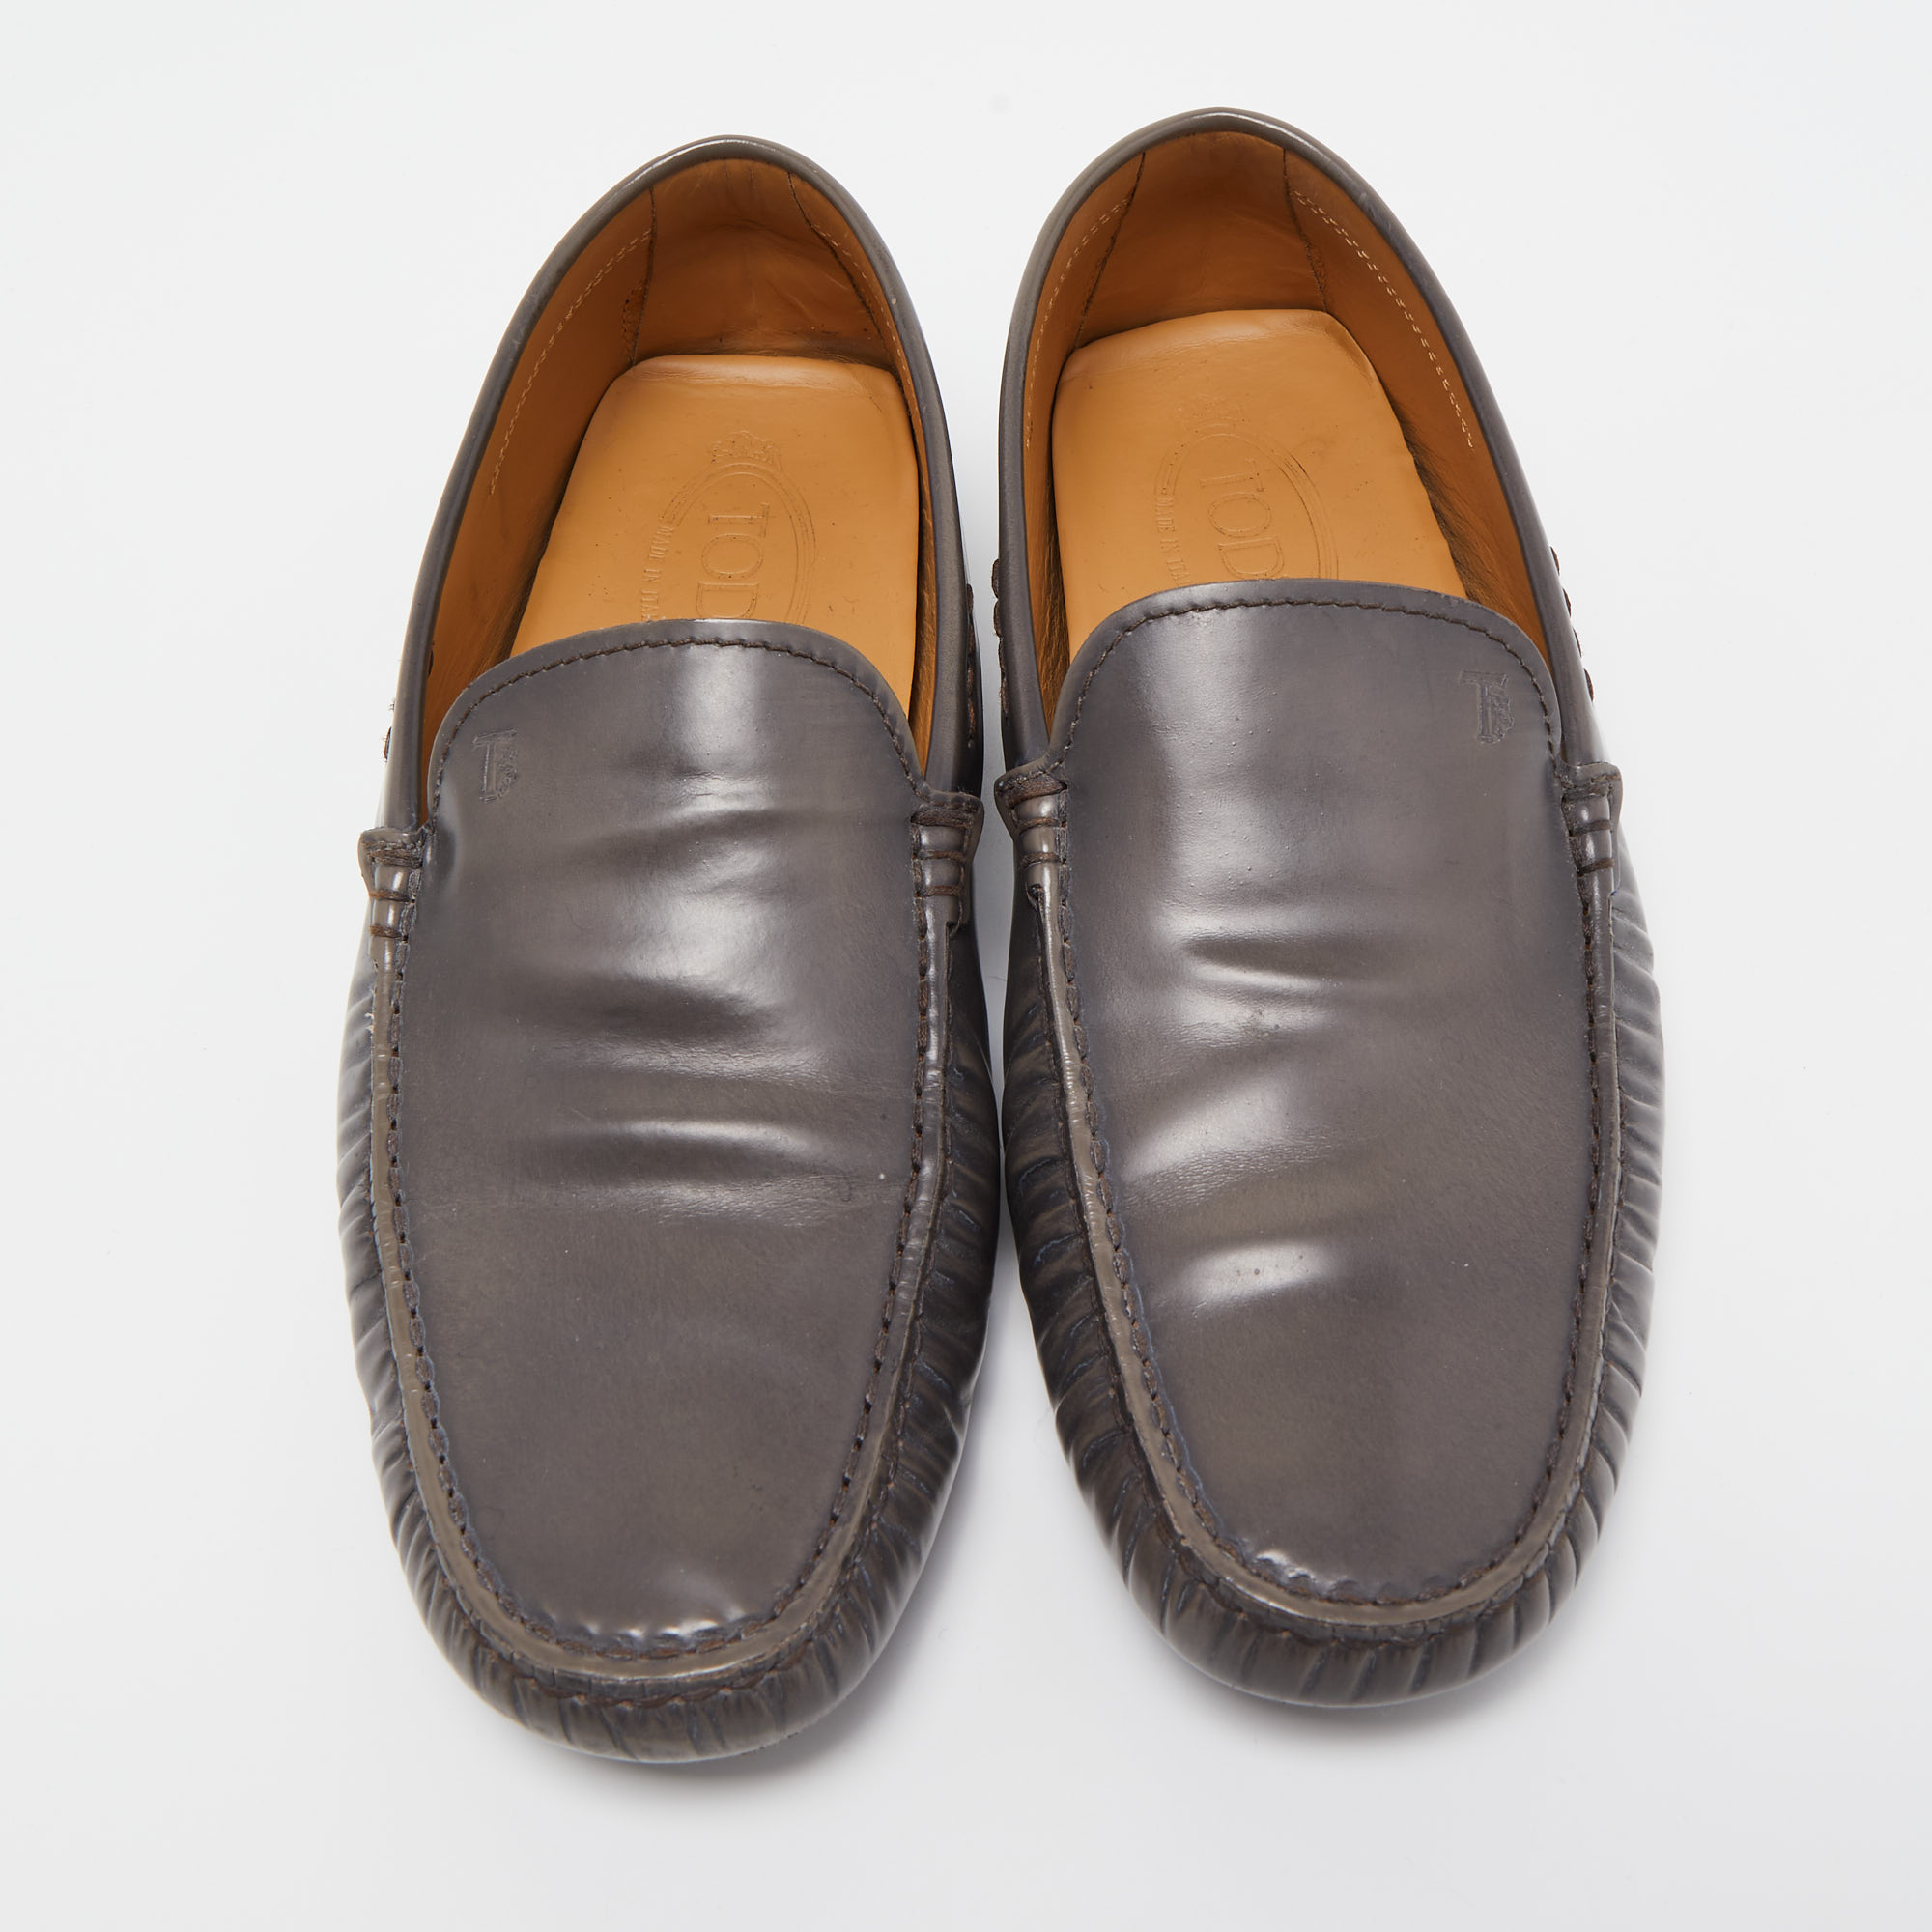 Tod's Light Brown Leather Slip On Loafers Size 41.5